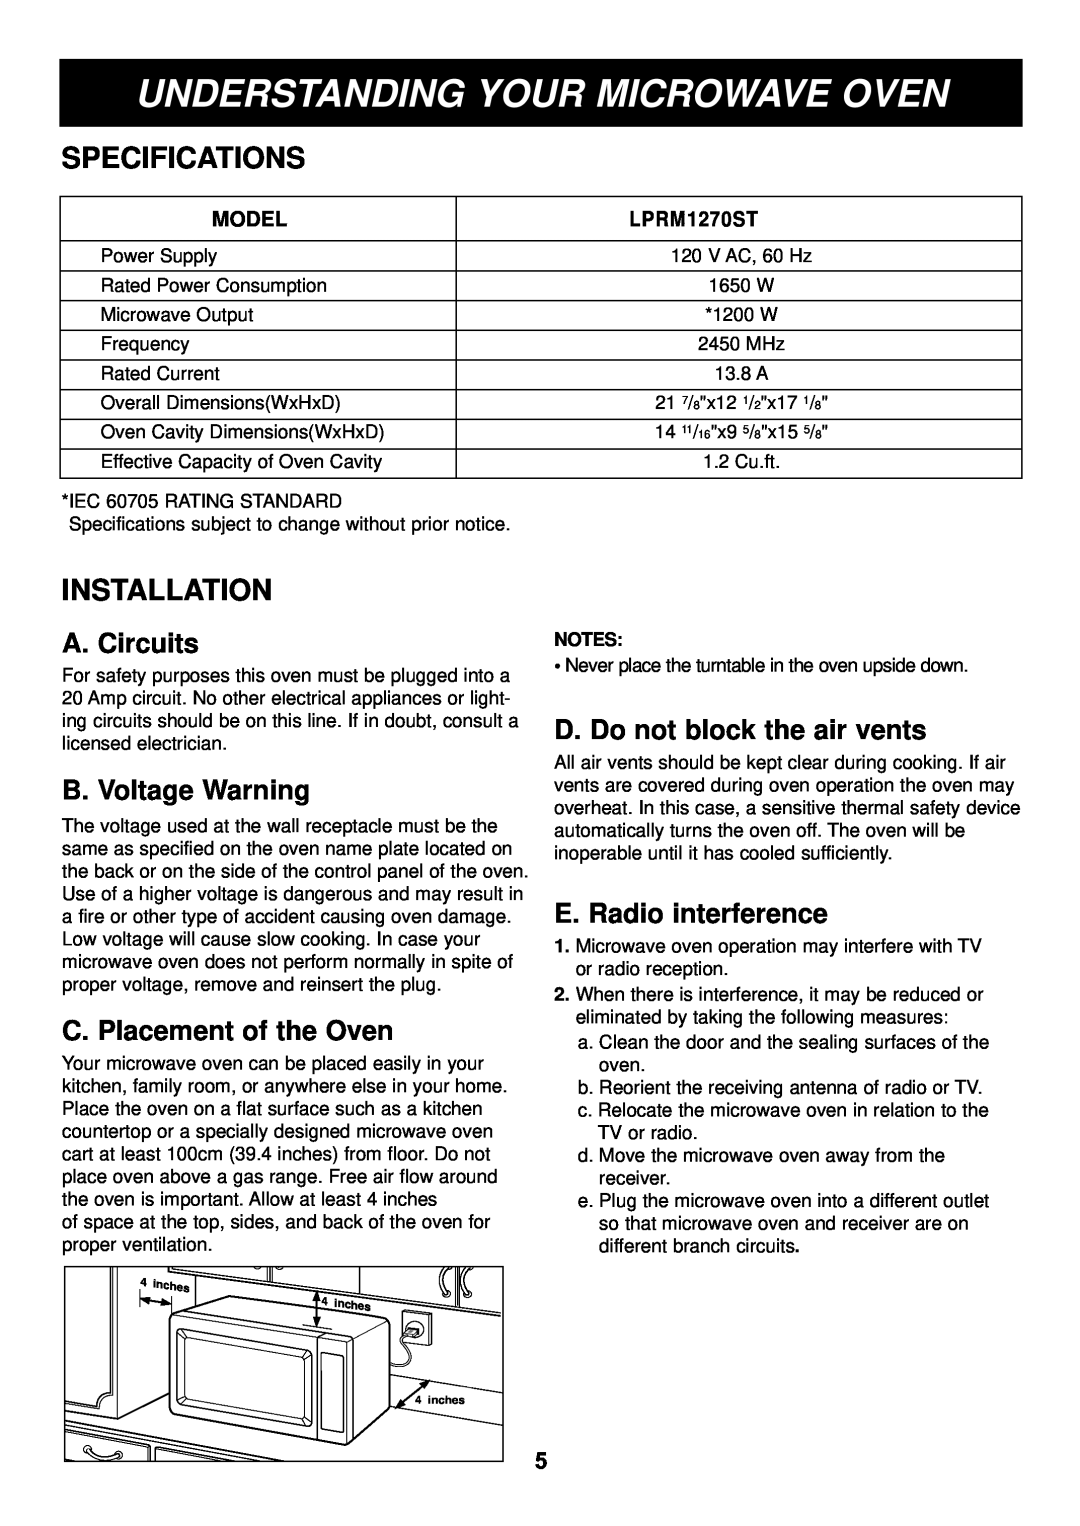 LG Electronics LPRM1270ST Understanding Your Microwave Oven, Specifications, Installation, A. Circuits, B. Voltage Warning 